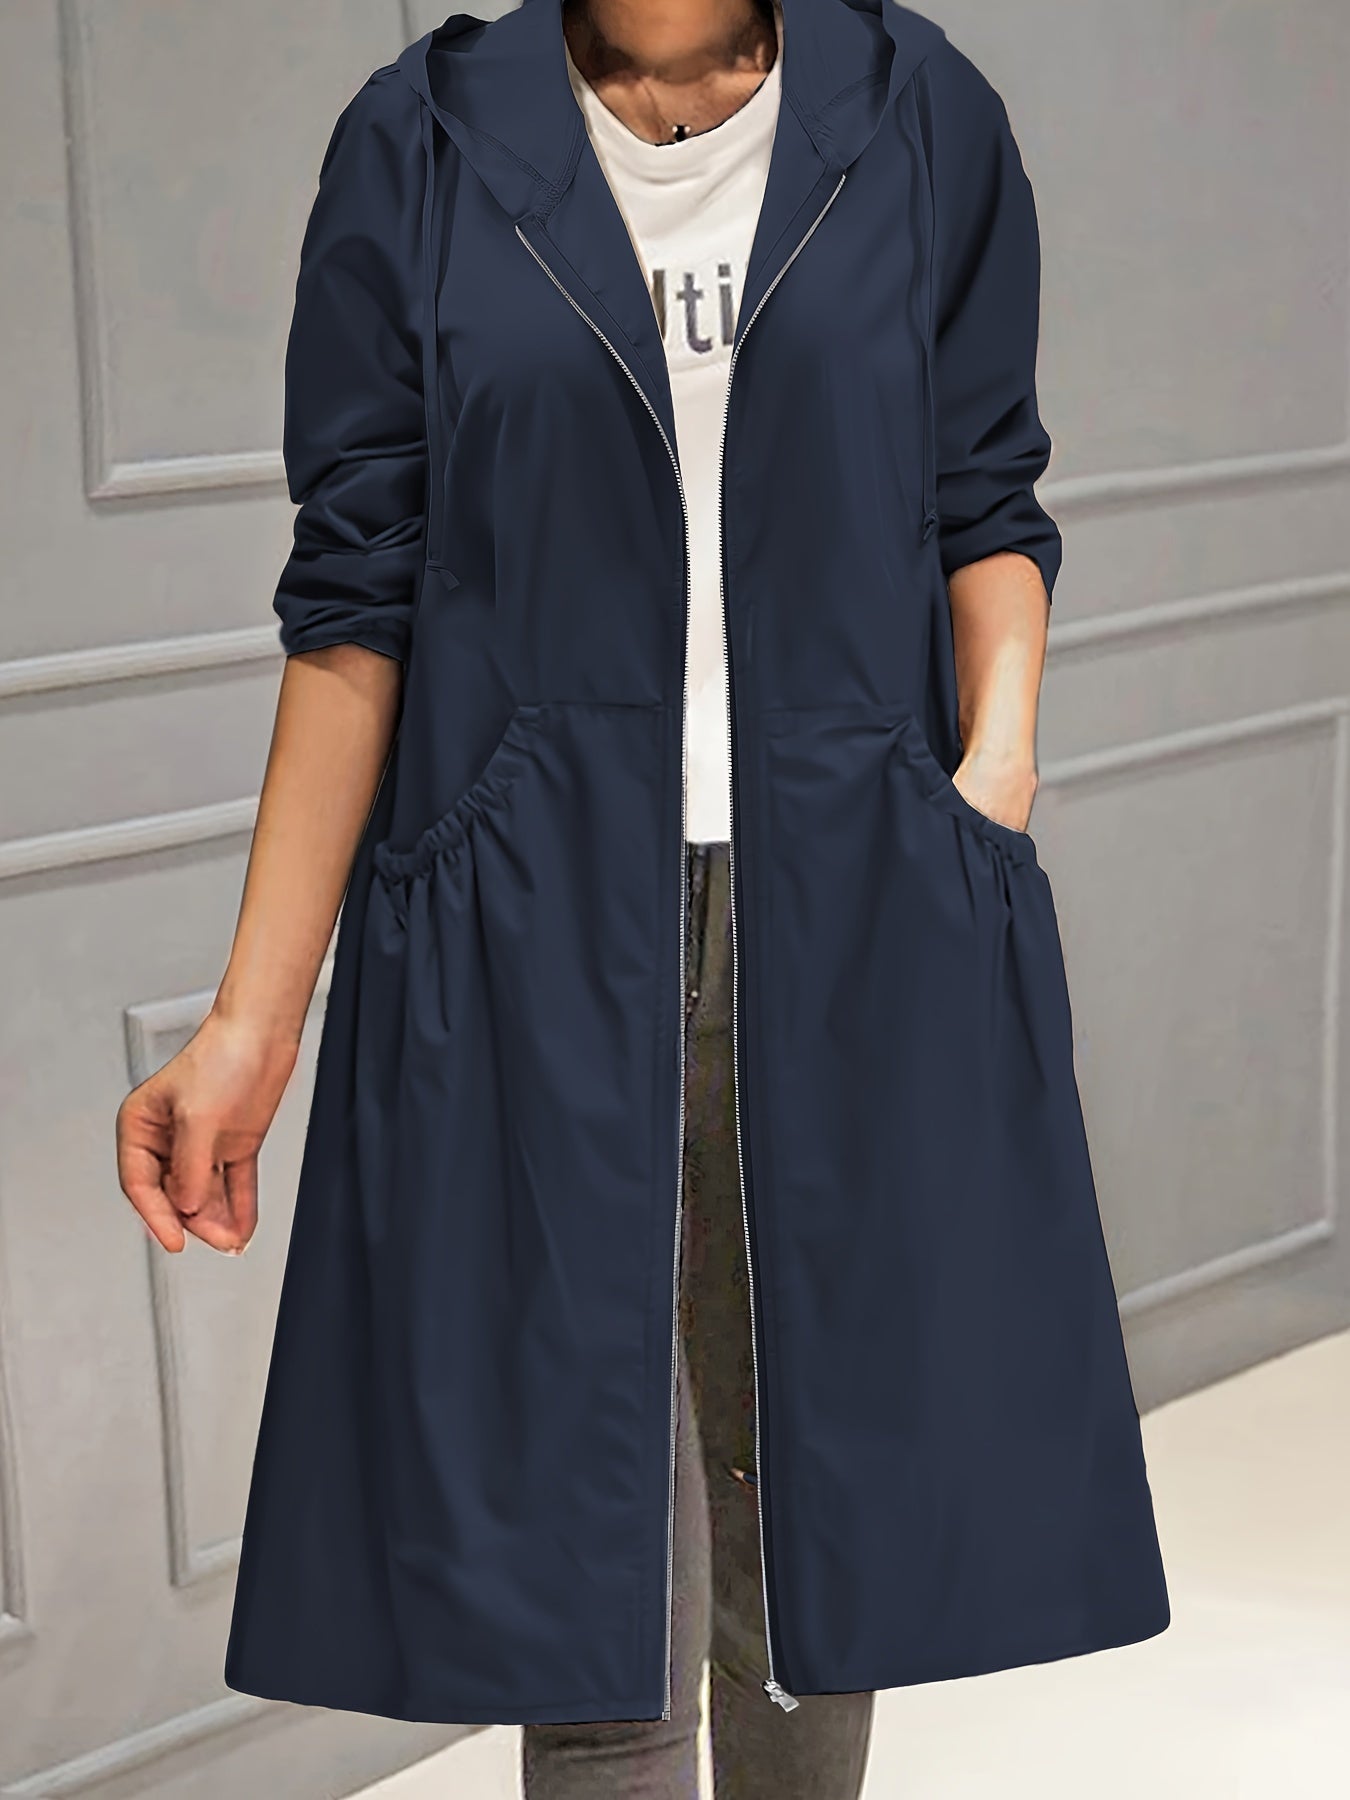 Plus Size Casual Trench Coat, Women's Plus Solid Long Sleeve Hooded Drawstring Zipper Longline Trench Coat With Pockets